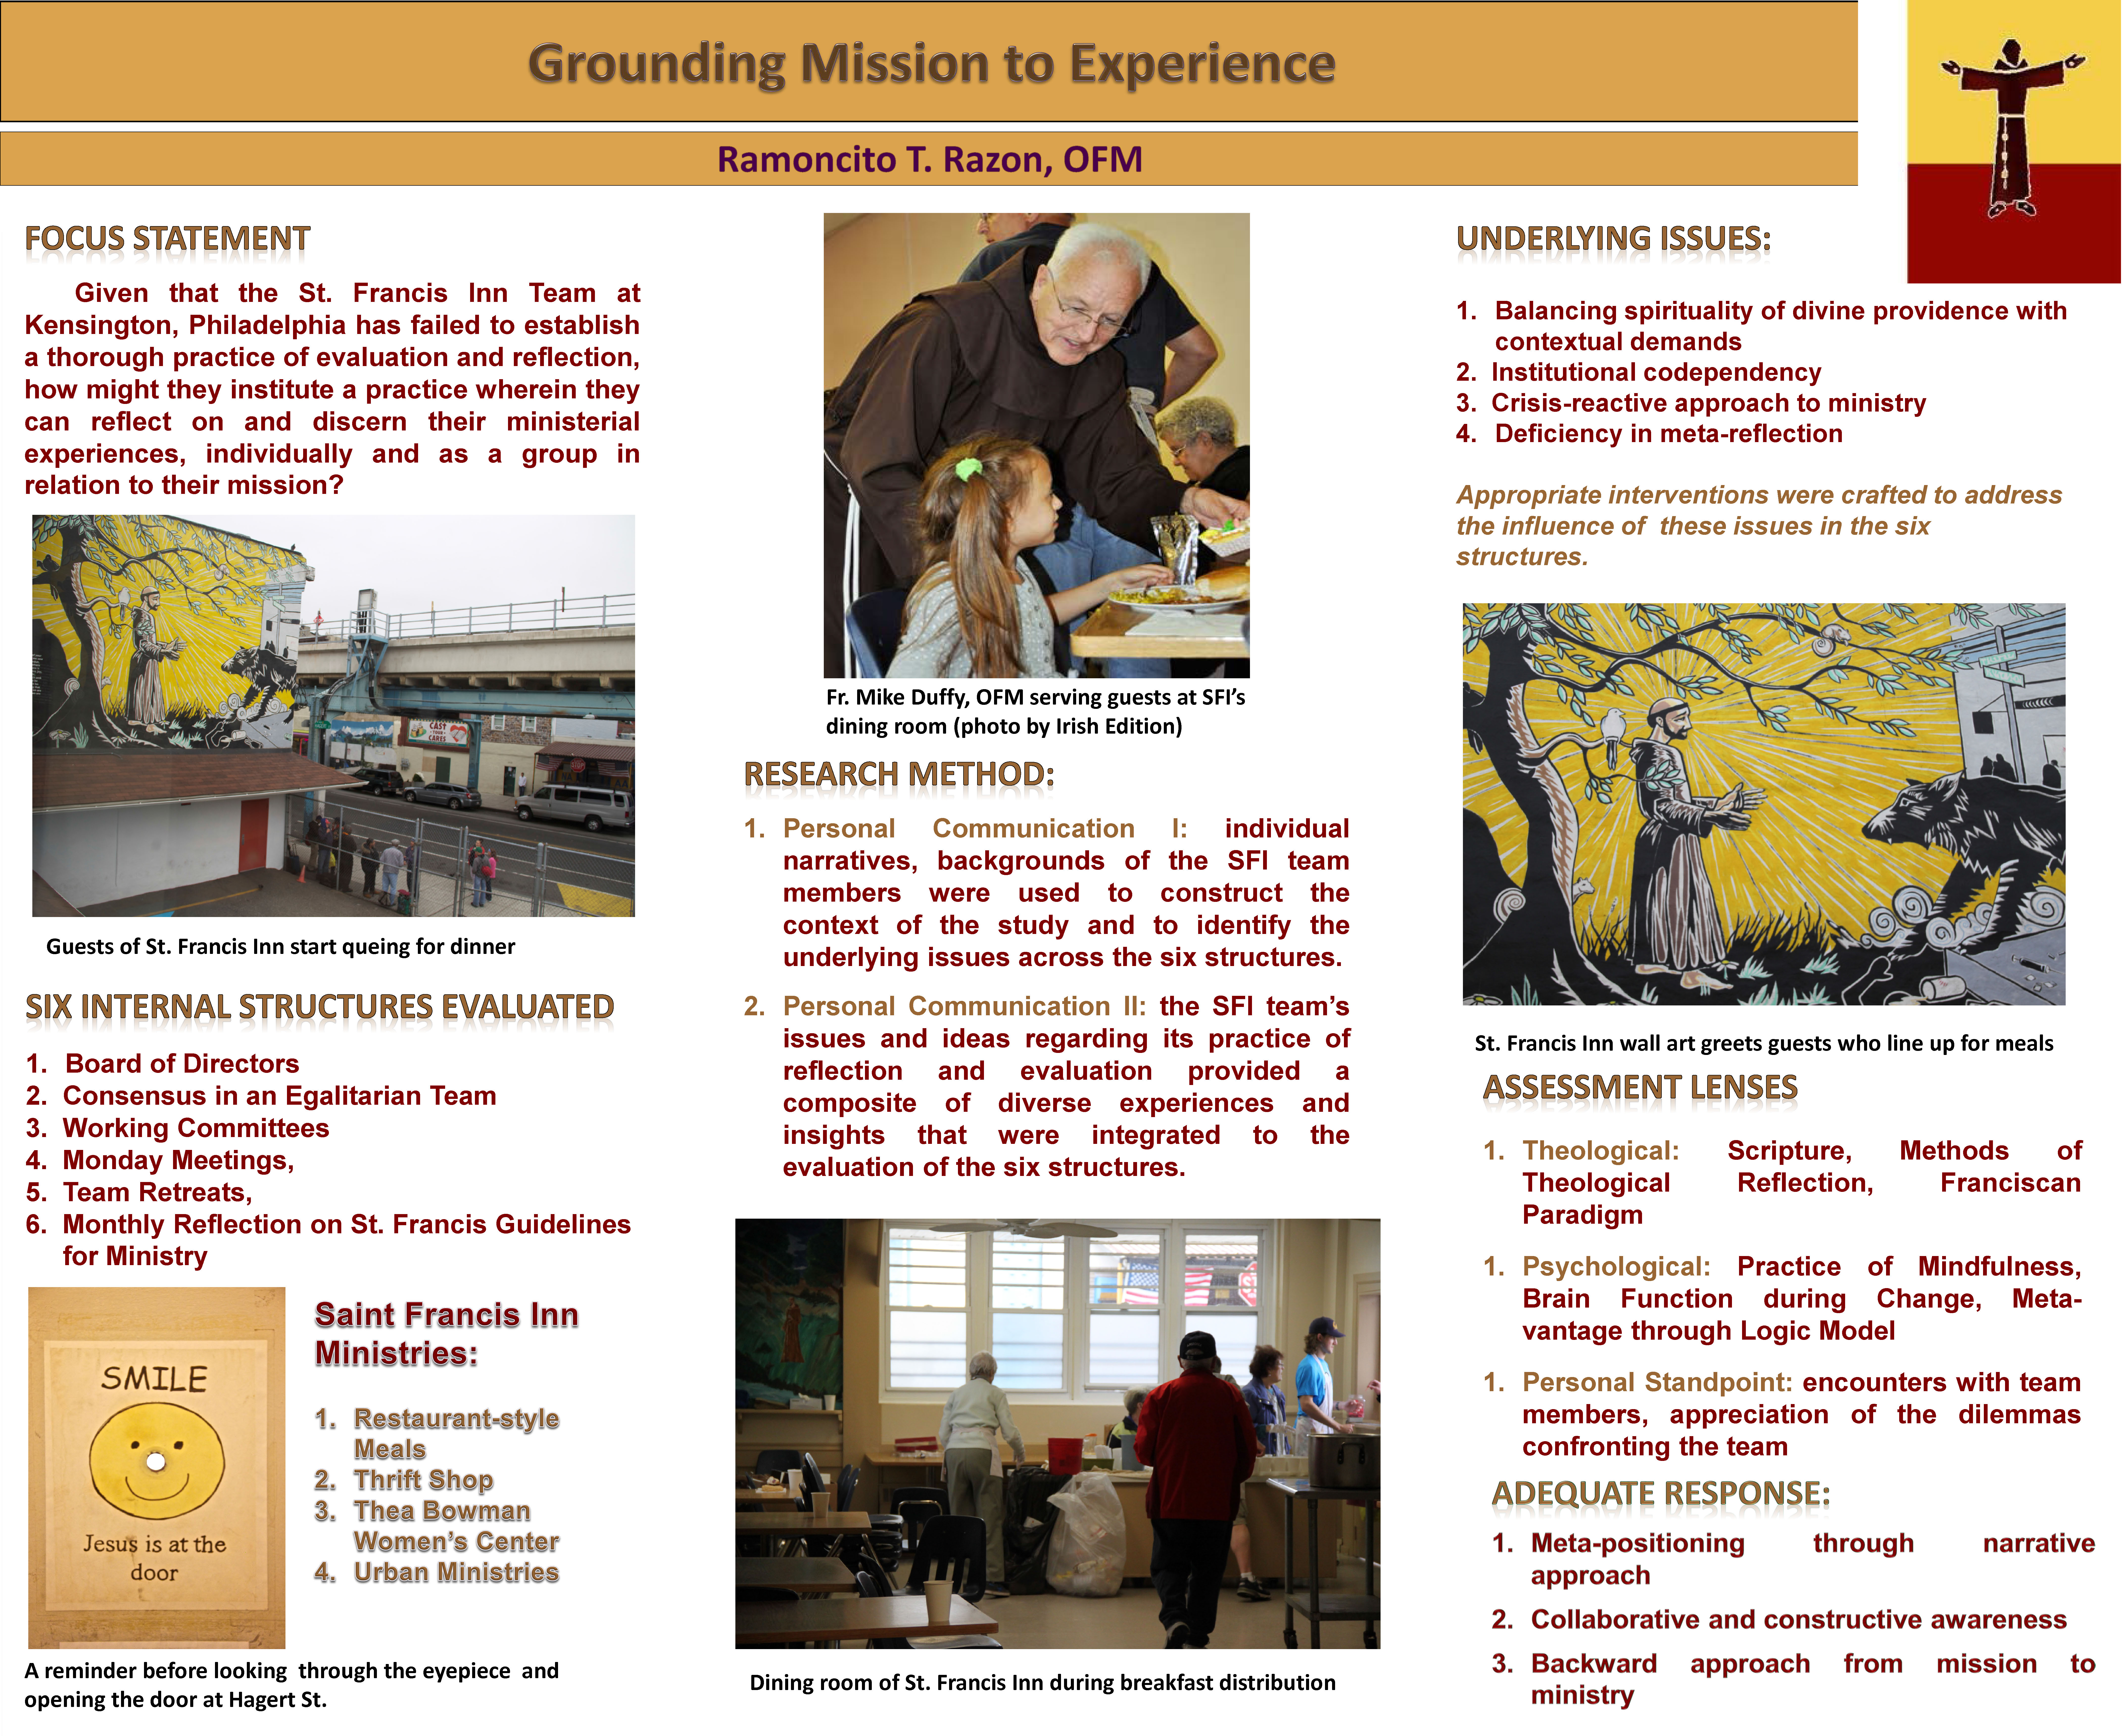 poster image: Grounding Mission to Experience